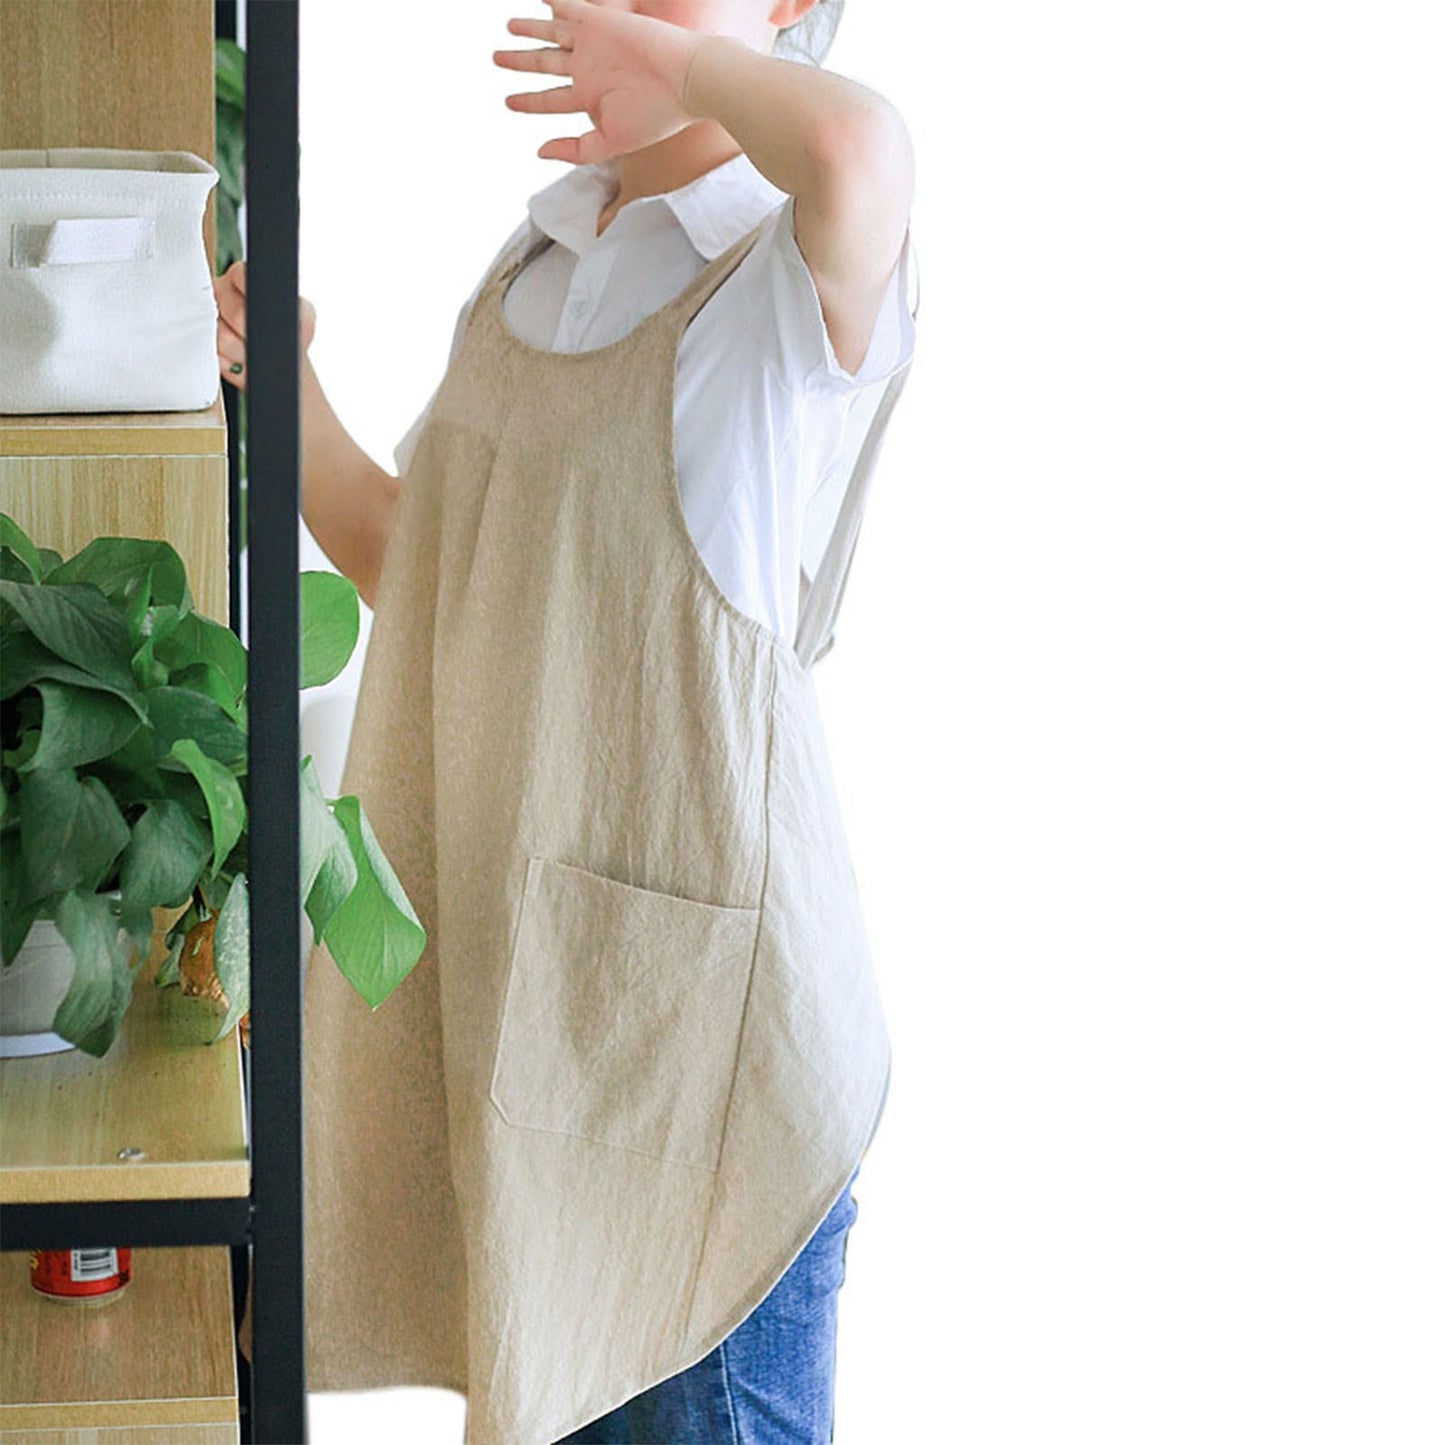 1pc Cotton Linen Apron; X-Back Aprons With Pockets; Halter Apron For Chef Gardening Cooking Baking Florist Shop Painting Pinafore Barista; Bib Overalls